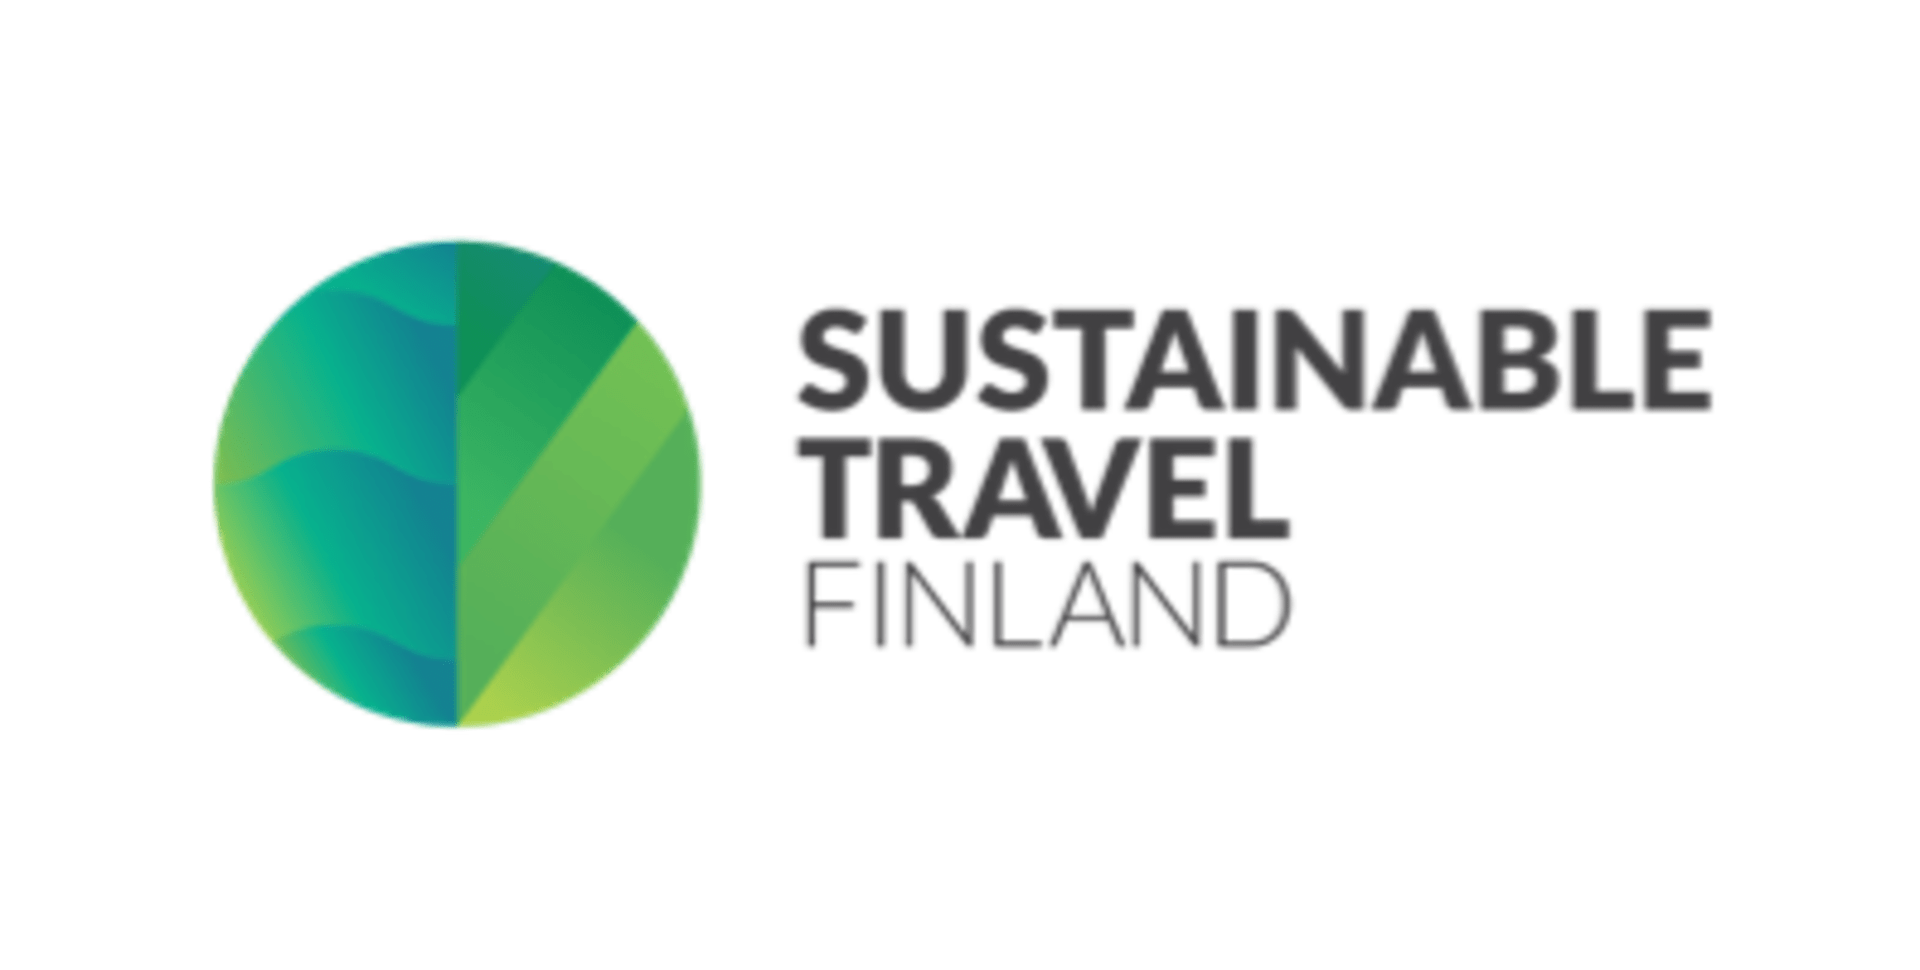 Sustainable Travel Finland certification